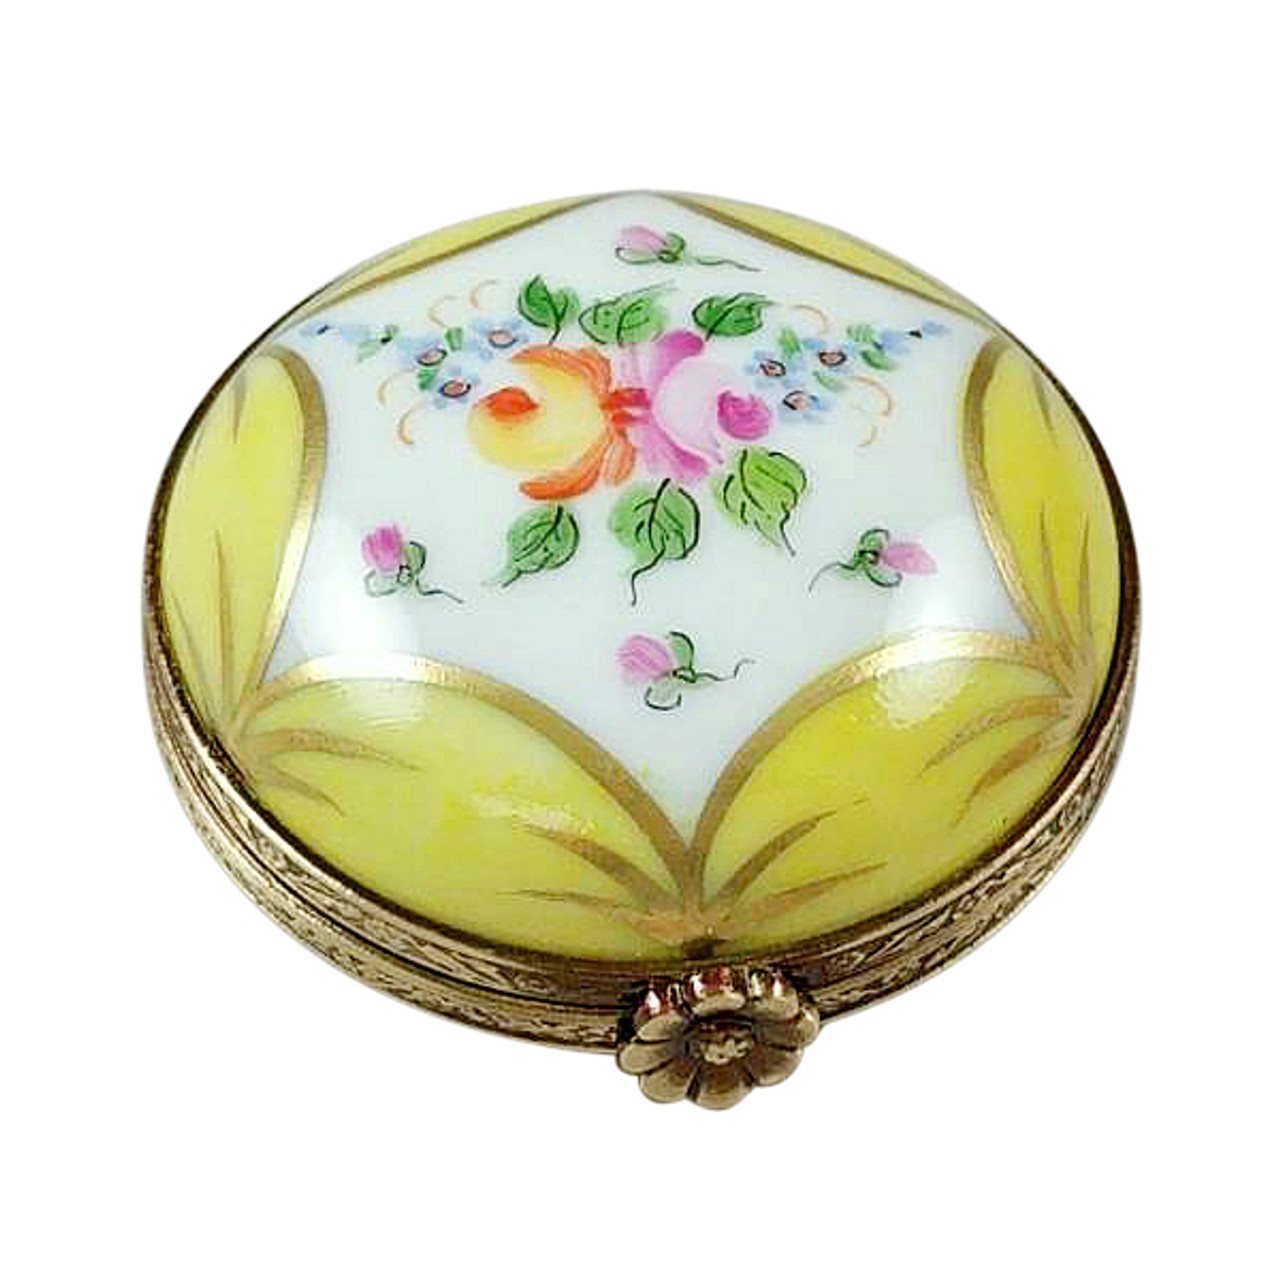 Rochard YELLOW ROUND WITH FLOWERS Limoges Box RE247-E